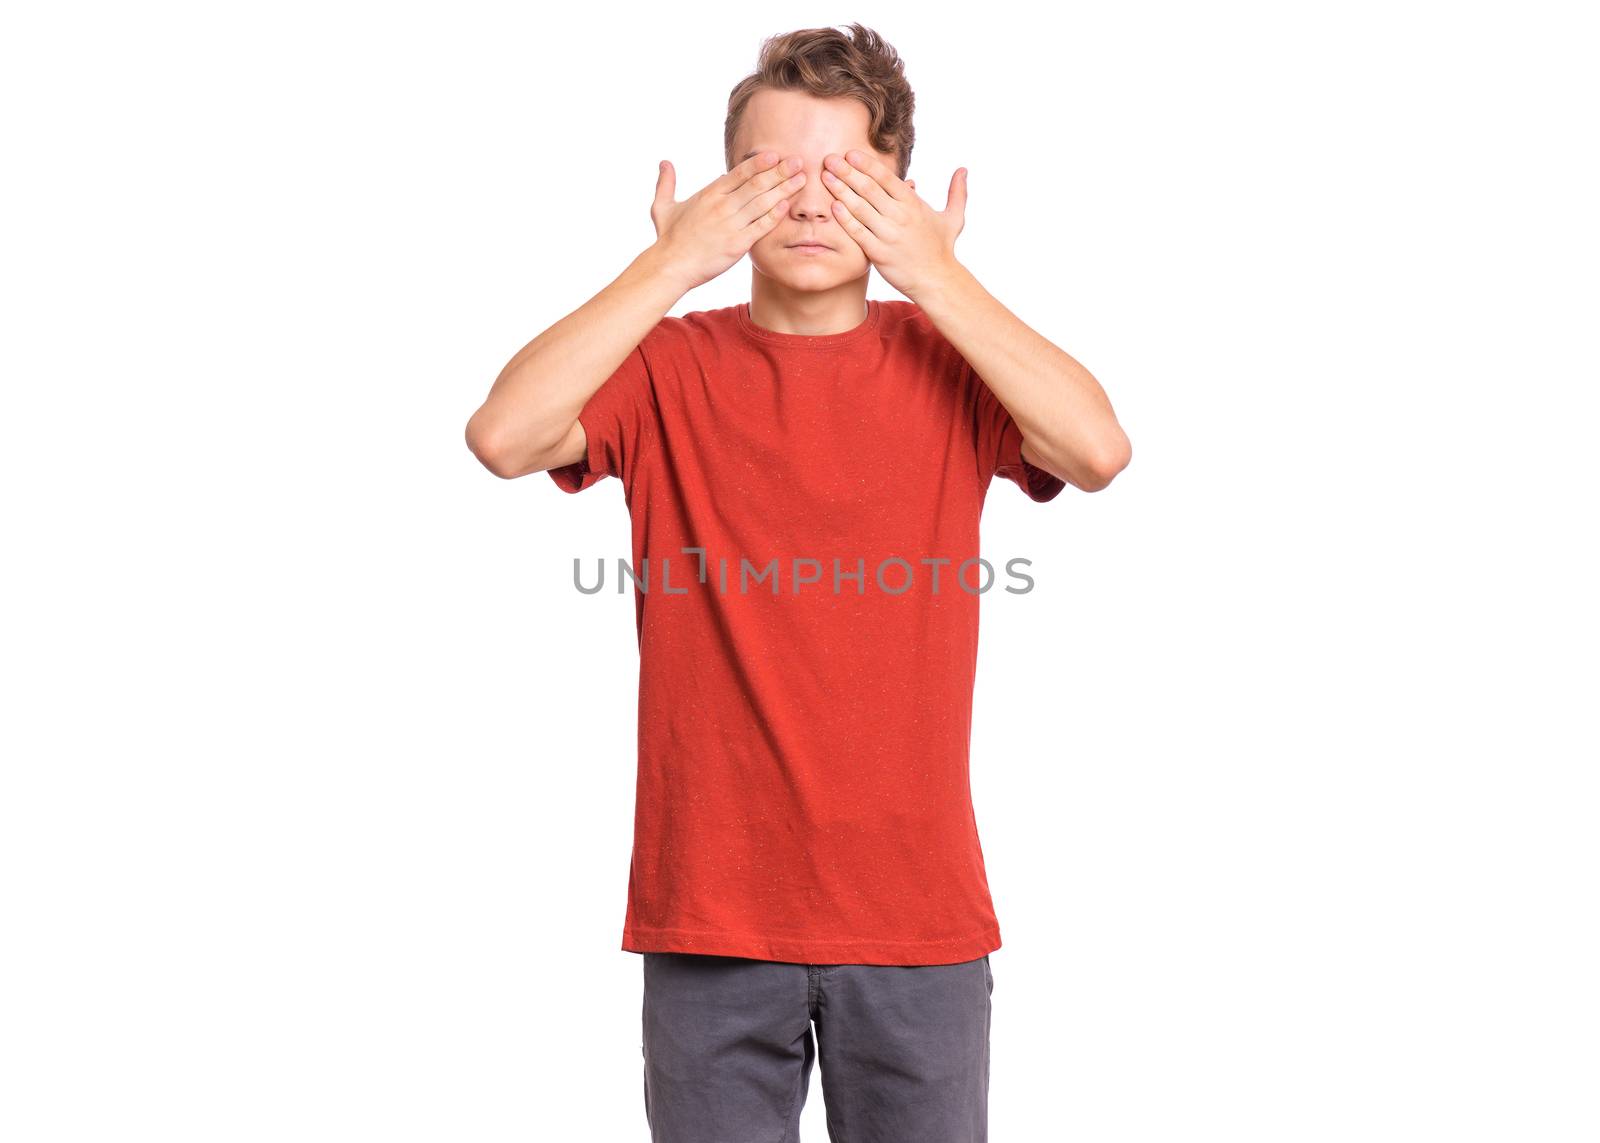 Handsome teen boy with sad expression covering face with hands while crying, isolated on white background